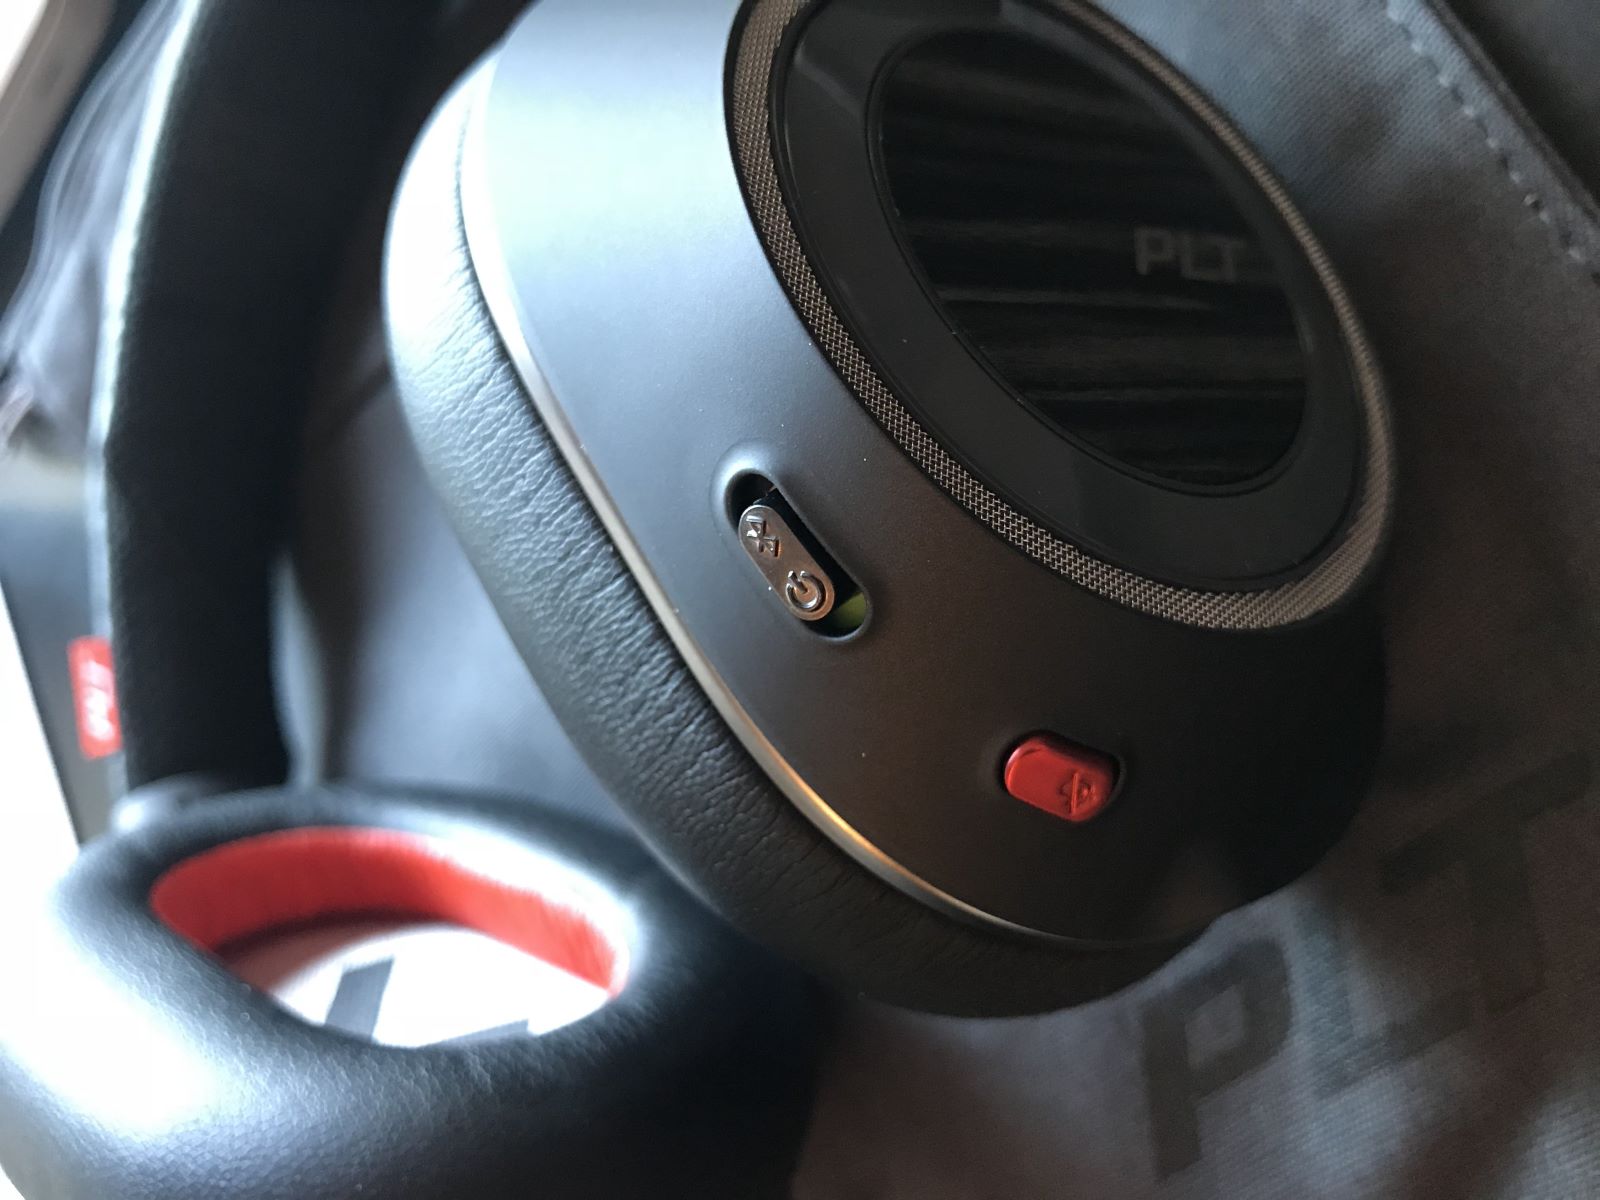 The Function Of ANC Button On Plantronics Headsets